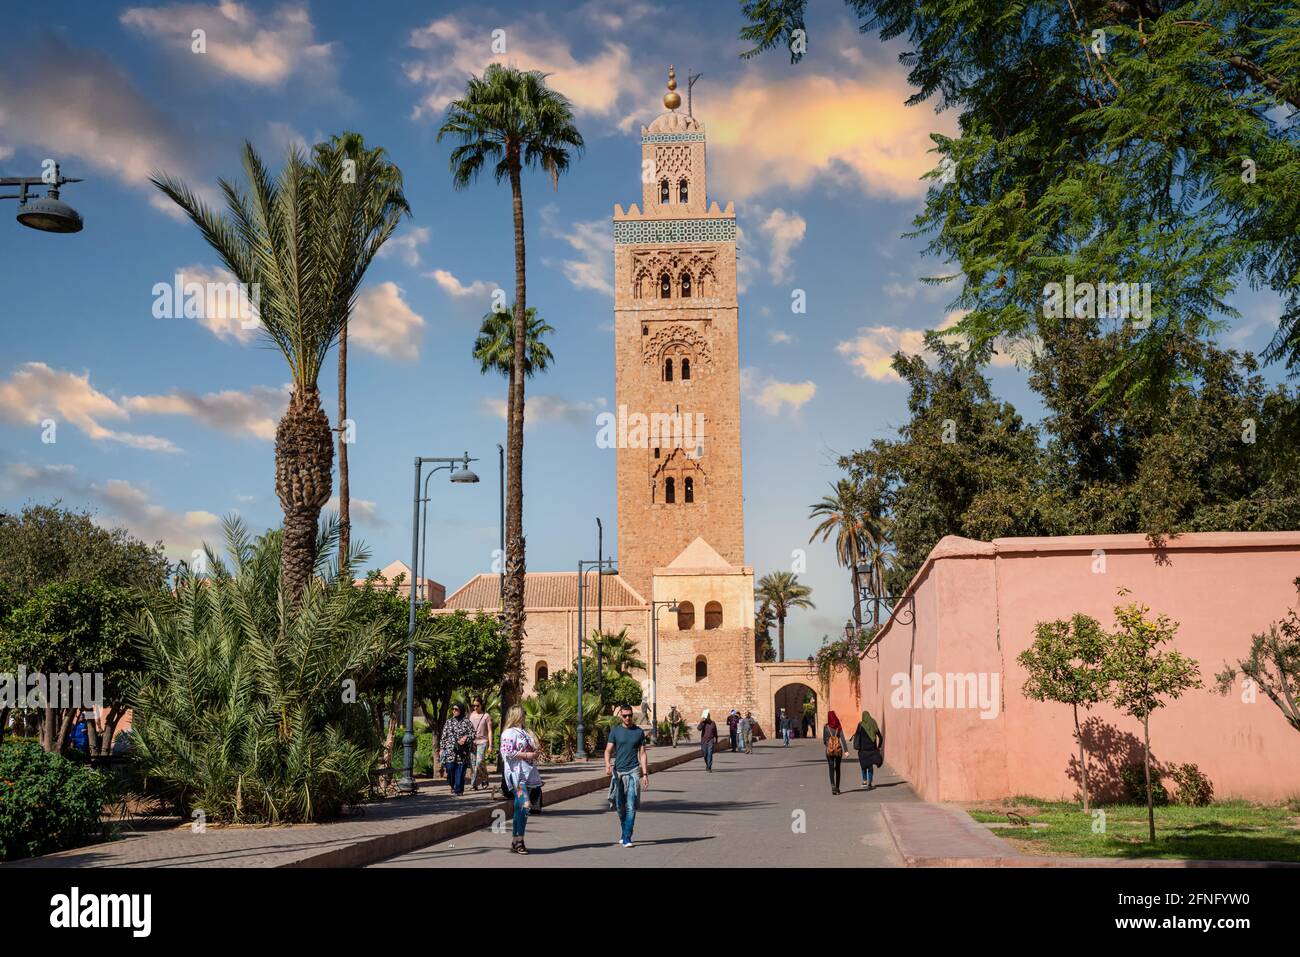 Marrakech, Morocco - November 9, 2017: French Gallery Institute historical building and front garden visited by various tourists on a sunny day Stock Photo